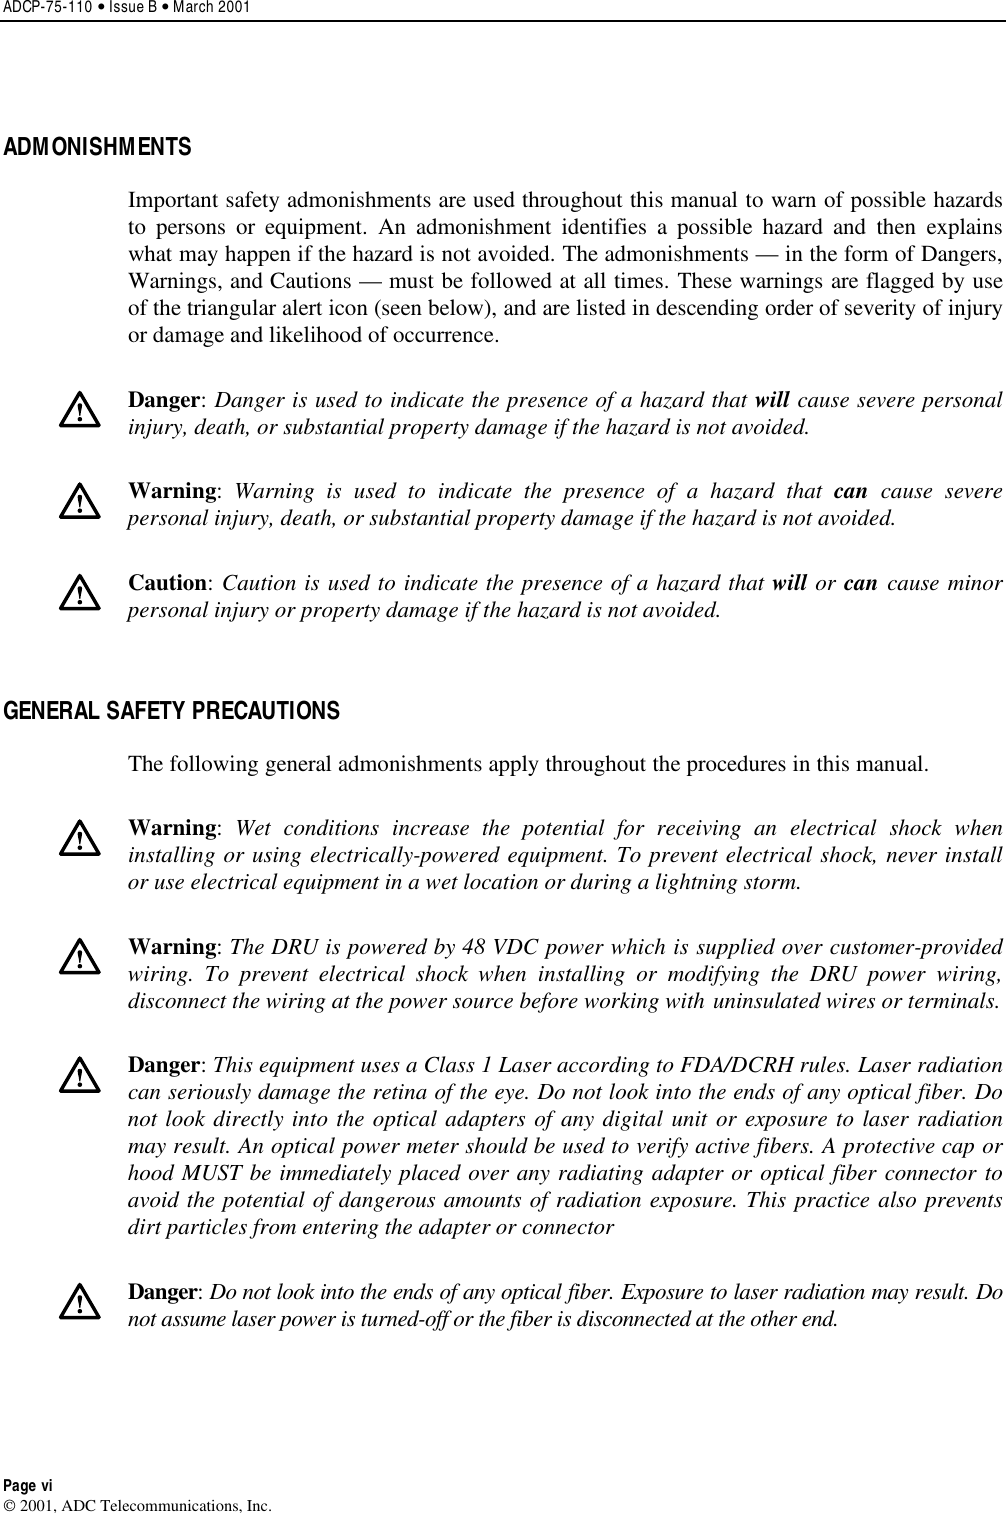 ADCP-75-110 • Issue B • March 2001Page vi2001, ADC Telecommunications, Inc.ADMONISHMENTSImportant safety admonishments are used throughout this manual to warn of possible hazardsto persons or equipment. An admonishment identifies apossible hazard and then explainswhat may happen if the hazard is not avoided. The admonishments —in the form of Dangers,Warnings, and Cautions —must be followed at all times. These warnings are flagged by useof the triangular alert icon (seen below), and are listed in descending order of severity of injuryor damage and likelihood of occurrence.Danger:Danger is used to indicate the presence of a hazard that will cause severe personalinjury, death, or substantial property damage if the hazard is not avoided.Warning:Warning is used to indicate the presence of a hazard that can cause severepersonal injury, death, or substantial property damage if the hazard is not avoided.Caution:Caution is used to indicate the presence of a hazard that will or can cause minorpersonal injury or property damage if the hazard is not avoided.GENERAL SAFETY PRECAUTIONSThe following general admonishments apply throughout the procedures in this manual.Warning:Wet conditions increase the potential for receiving an electrical shock wheninstalling or using electrically-powered equipment. To prevent electrical shock, never installor use electrical equipment in a wet location or during a lightning storm.Warning:The DRU is powered by 48 VDC power which is supplied over customer-providedwiring. To prevent electrical shock when installing or modifying the DRU power wiring,disconnect the wiring at the power source before working with uninsulated wires or terminals.Danger:This equipment uses aClass 1Laser according to FDA/DCRH rules. Laser radiationcan seriously damage the retina of the eye. Do not look into the ends of any optical fiber. Donot look directly into the optical adapters of any digital unit or exposure to laser radiationmay result. An optical power meter should be used to verify active fibers. Aprotective cap orhood MUST be immediately placed over any radiating adapter or optical fiber connector toavoid the potential of dangerous amounts of radiation exposure. This practice also preventsdirt particles from entering the adapter or connectorDanger:Do not look into the ends of any optical fiber. Exposure to laser radiation may result. Donot assume laser power is turned-off or the fiber is disconnected at the other end.